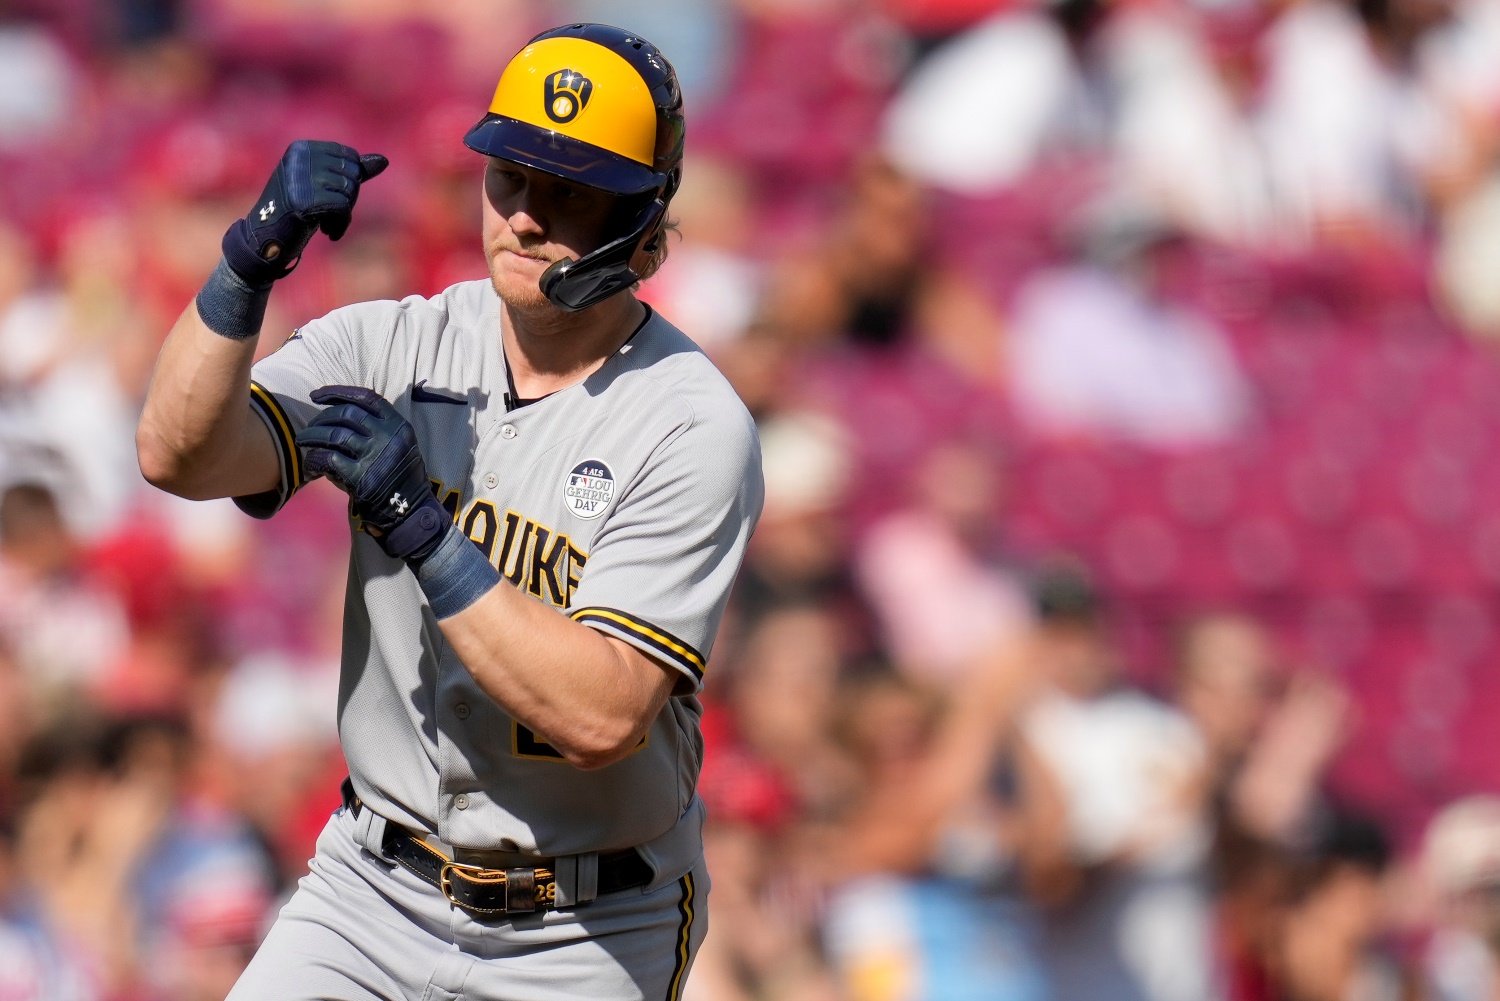 The @brewers continue to build momentum towards October with a